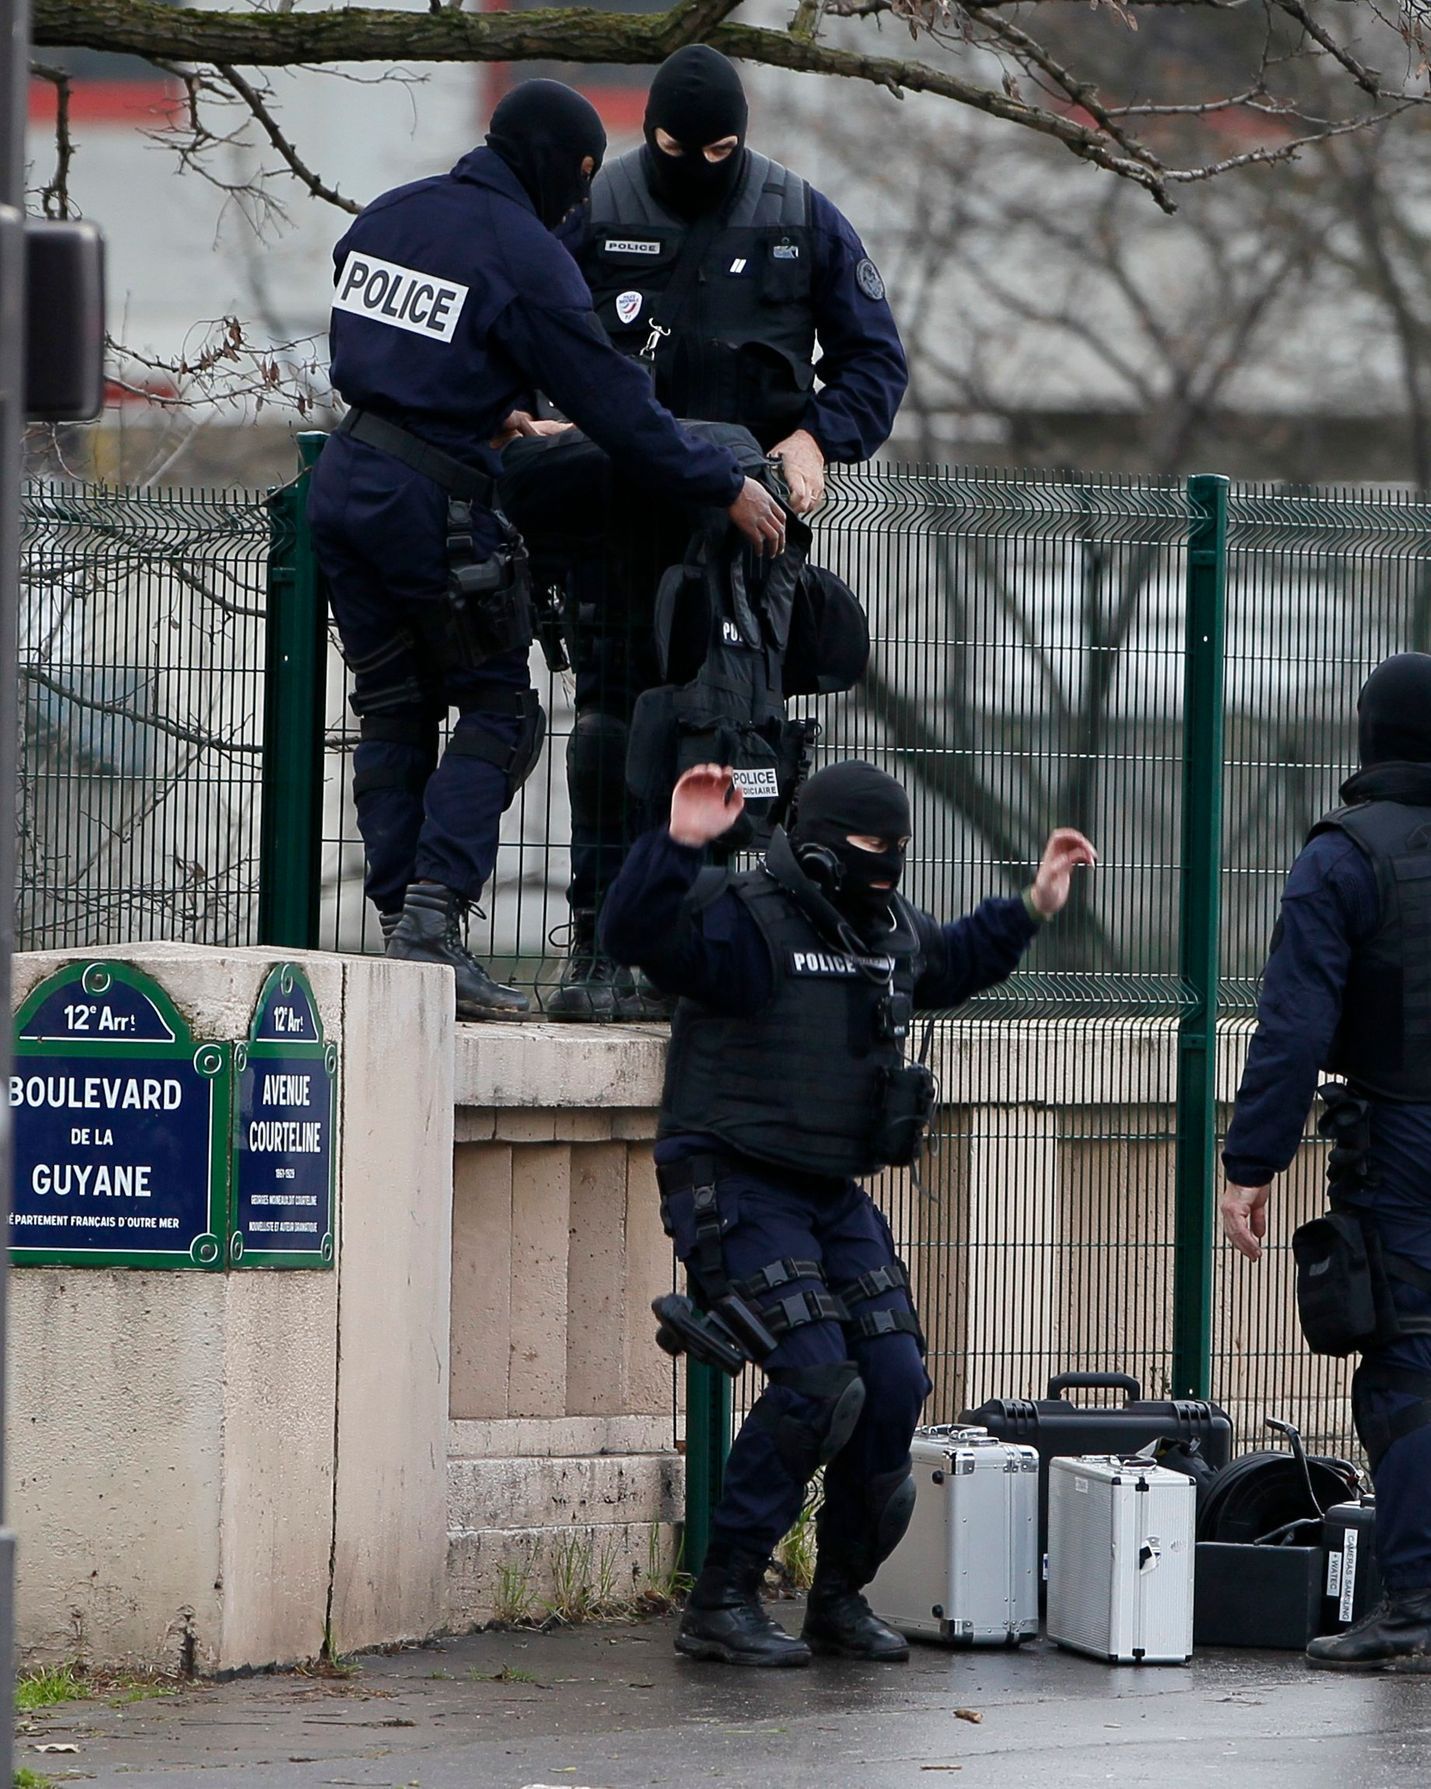 Members of the French police special force advance with their equipment near the scene of a hostage taking at a kosher supermarket in eastern Paris